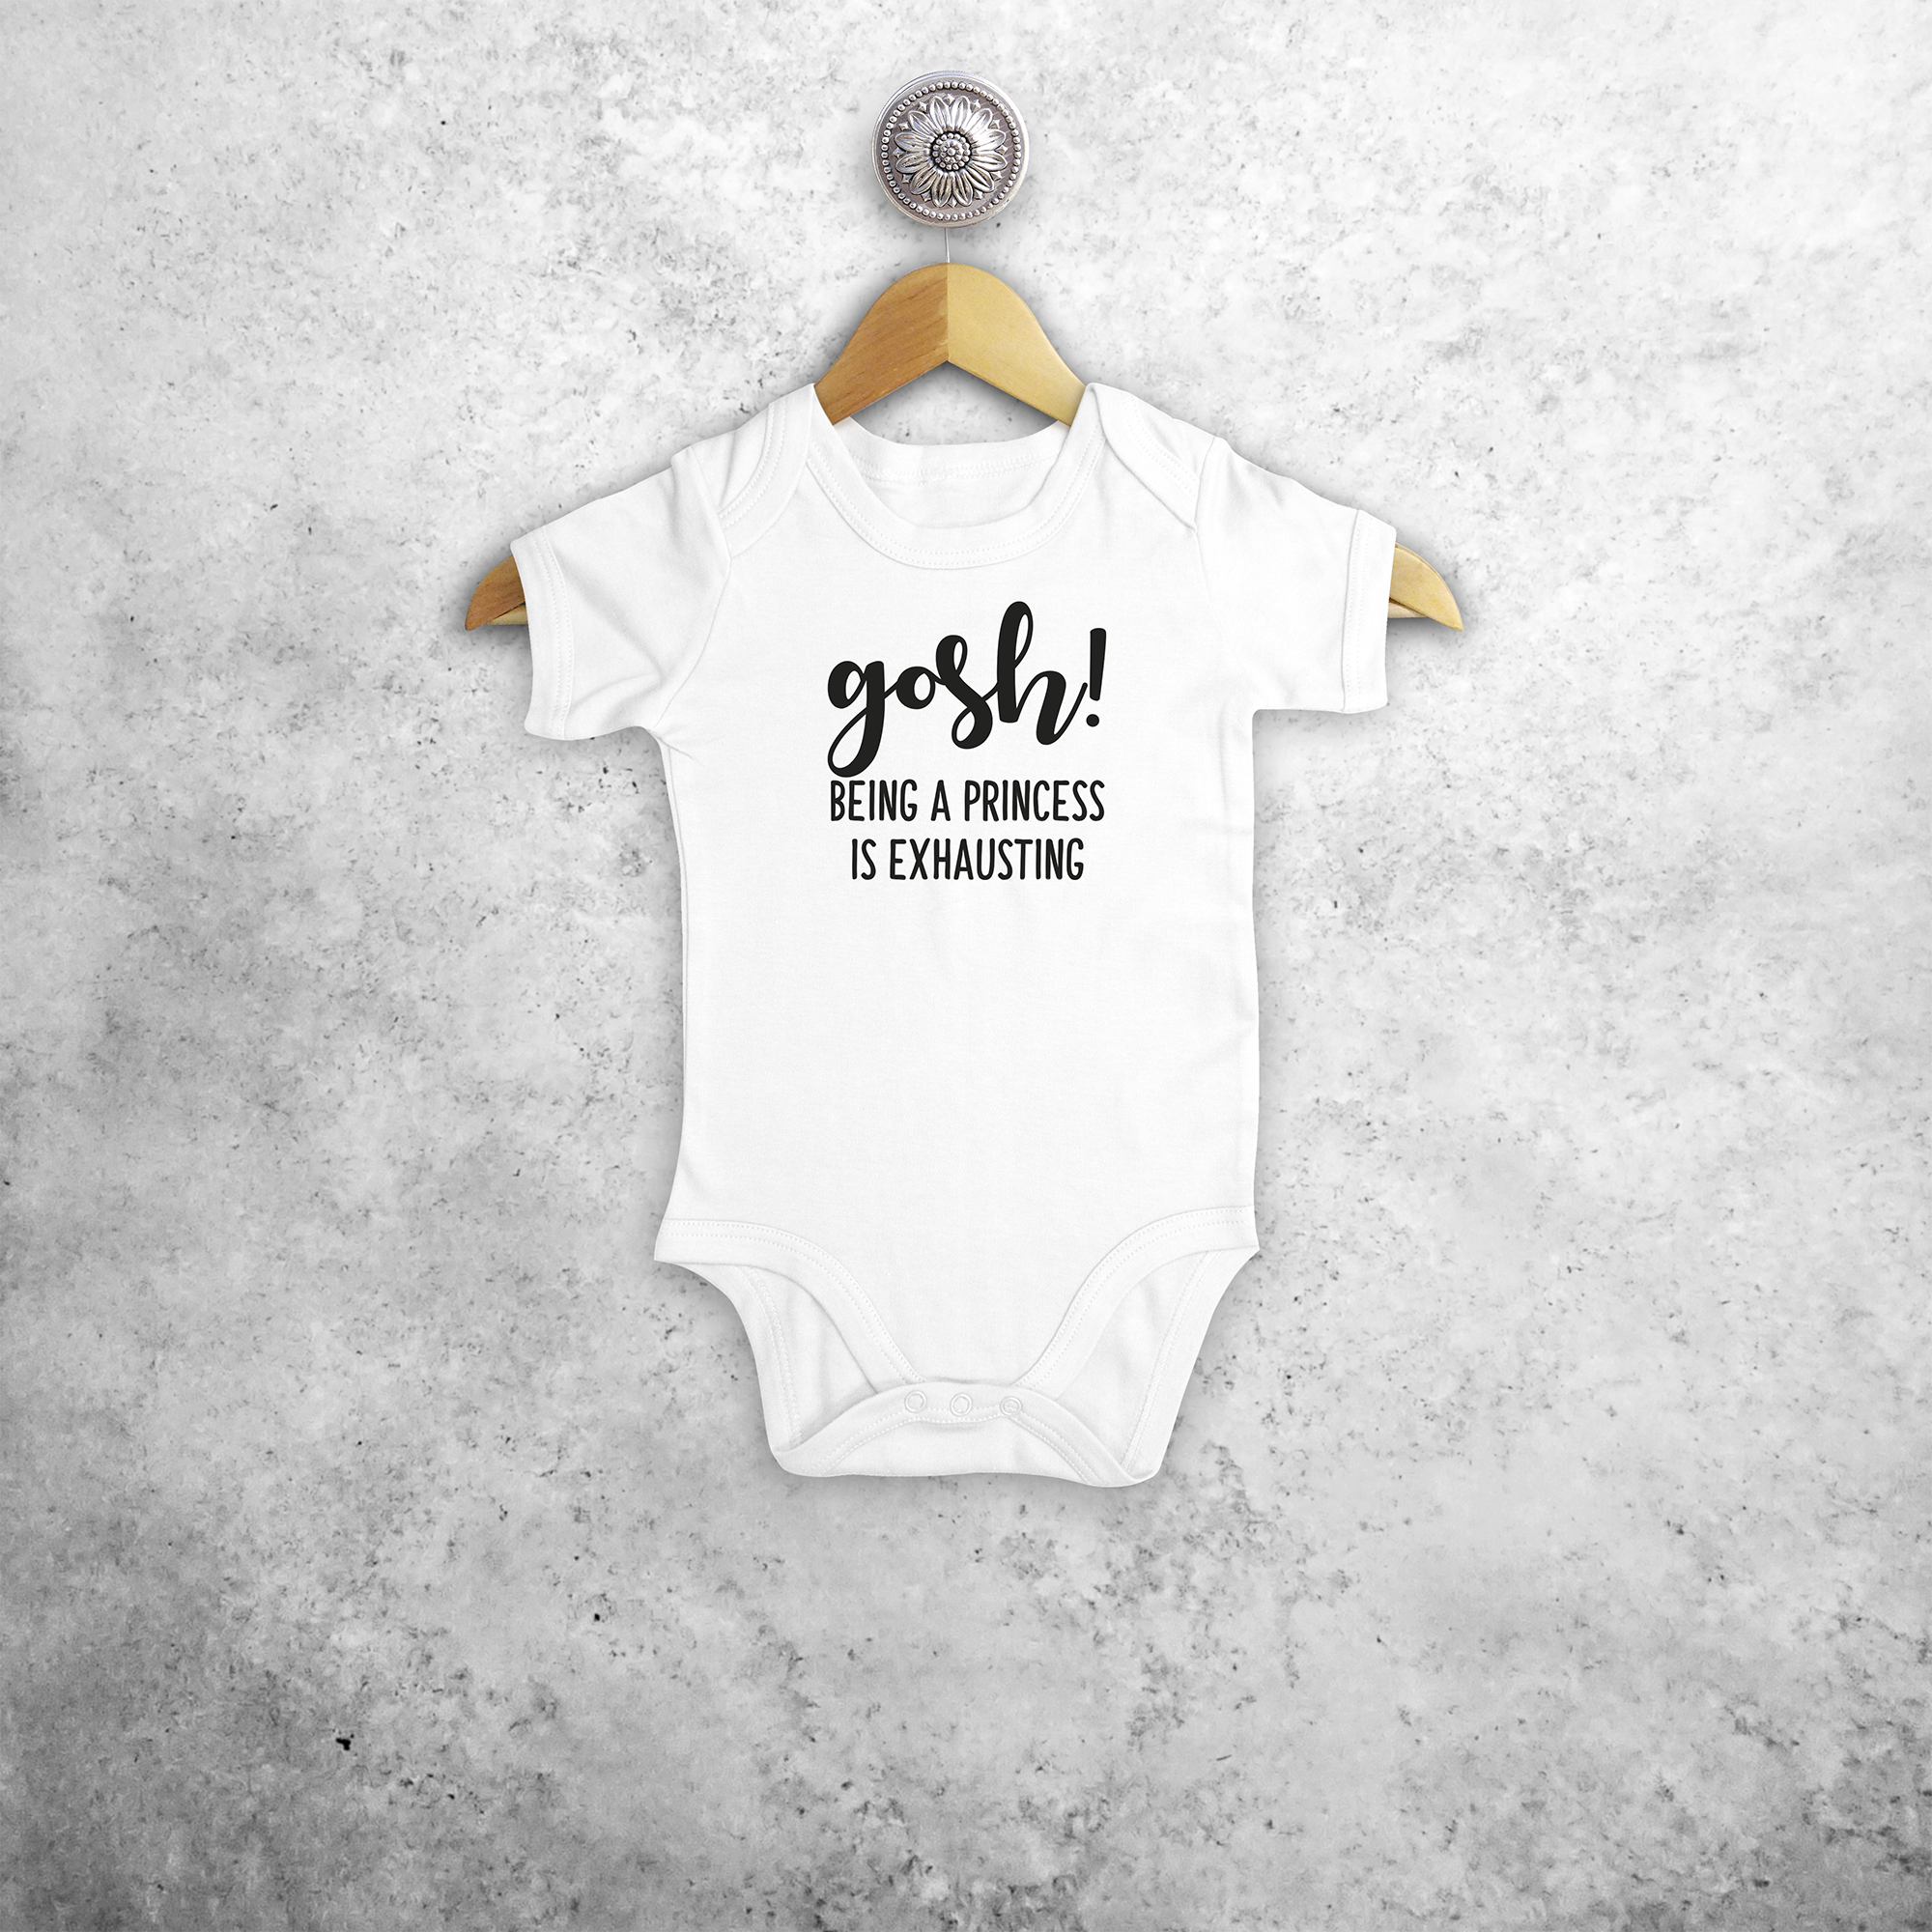 'Gosh! Being a princess is exhausting' baby shortsleeve bodysuit